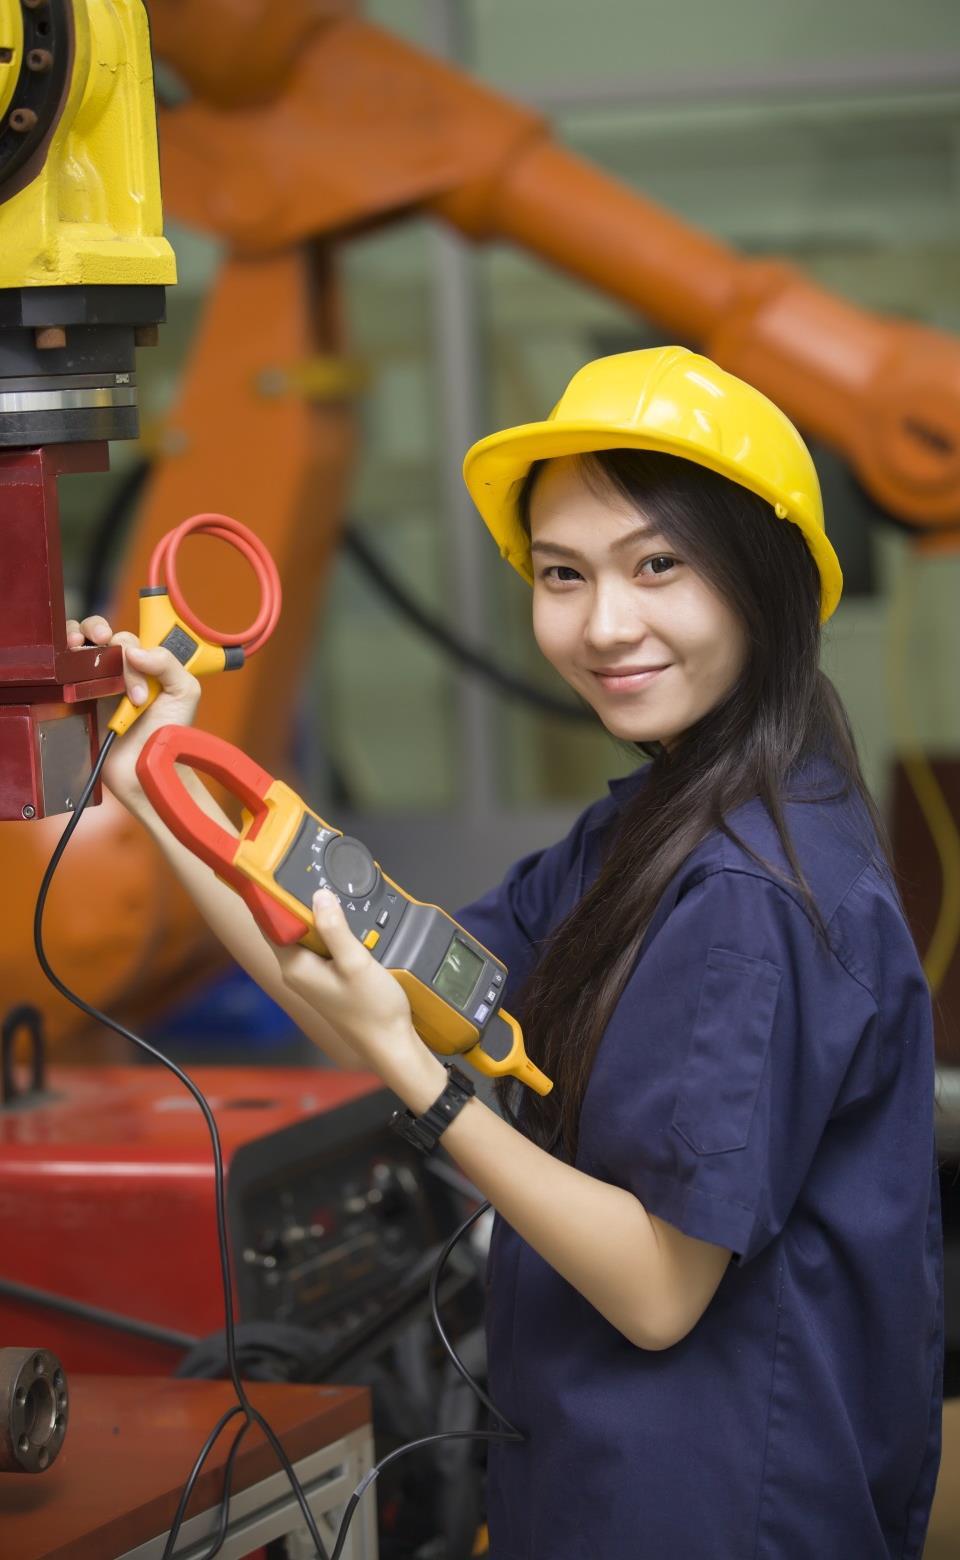 Female employment is projected to account for more than